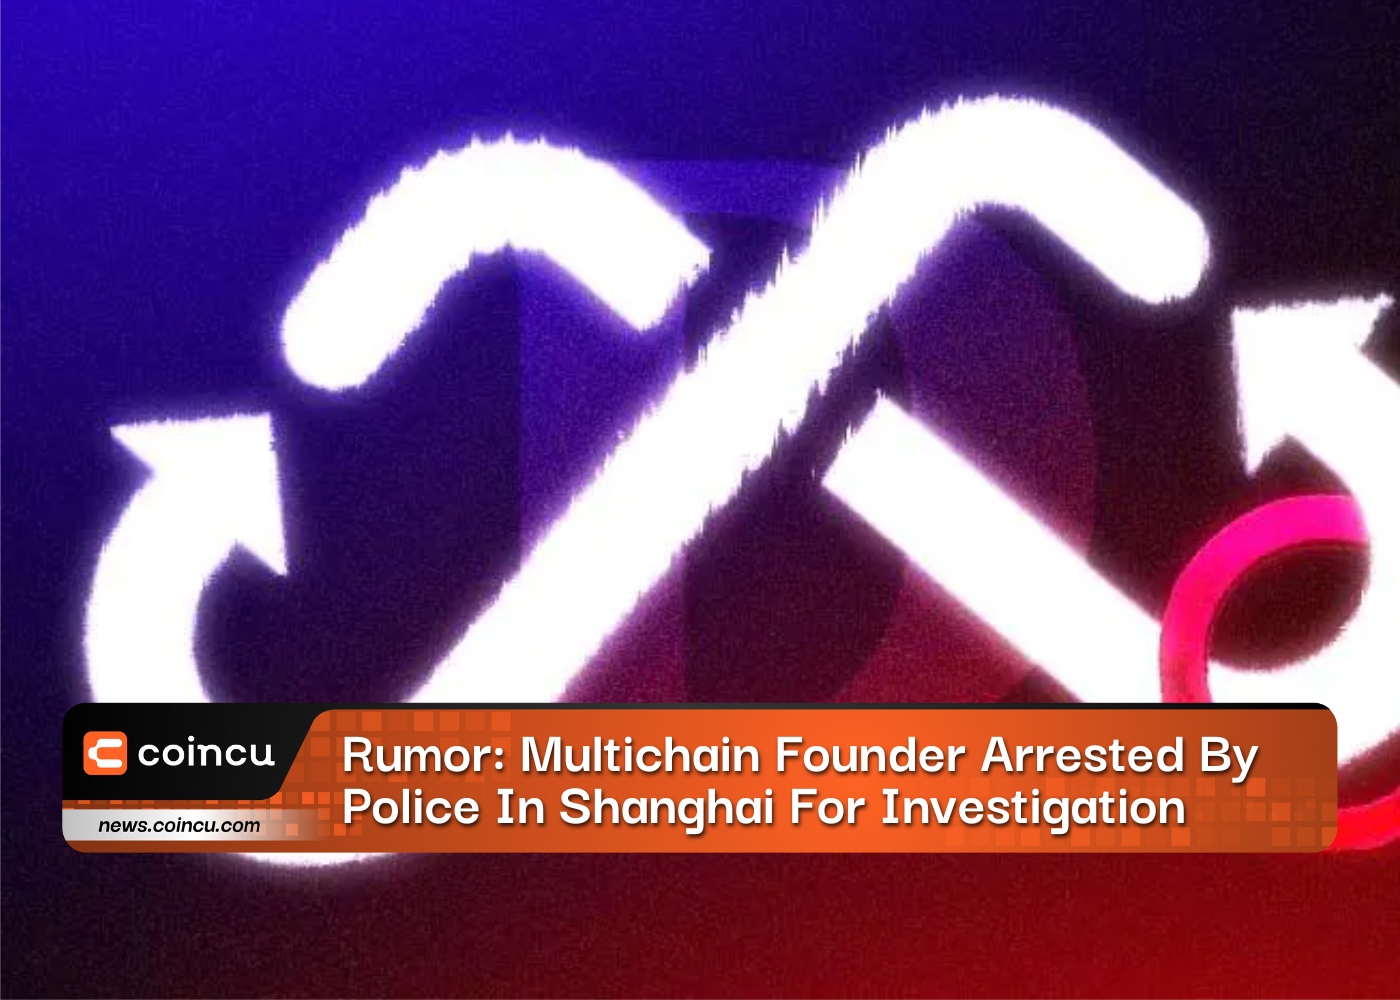 Rumor: Multichain Founder Arrested by Police In Shanghai For Investigation